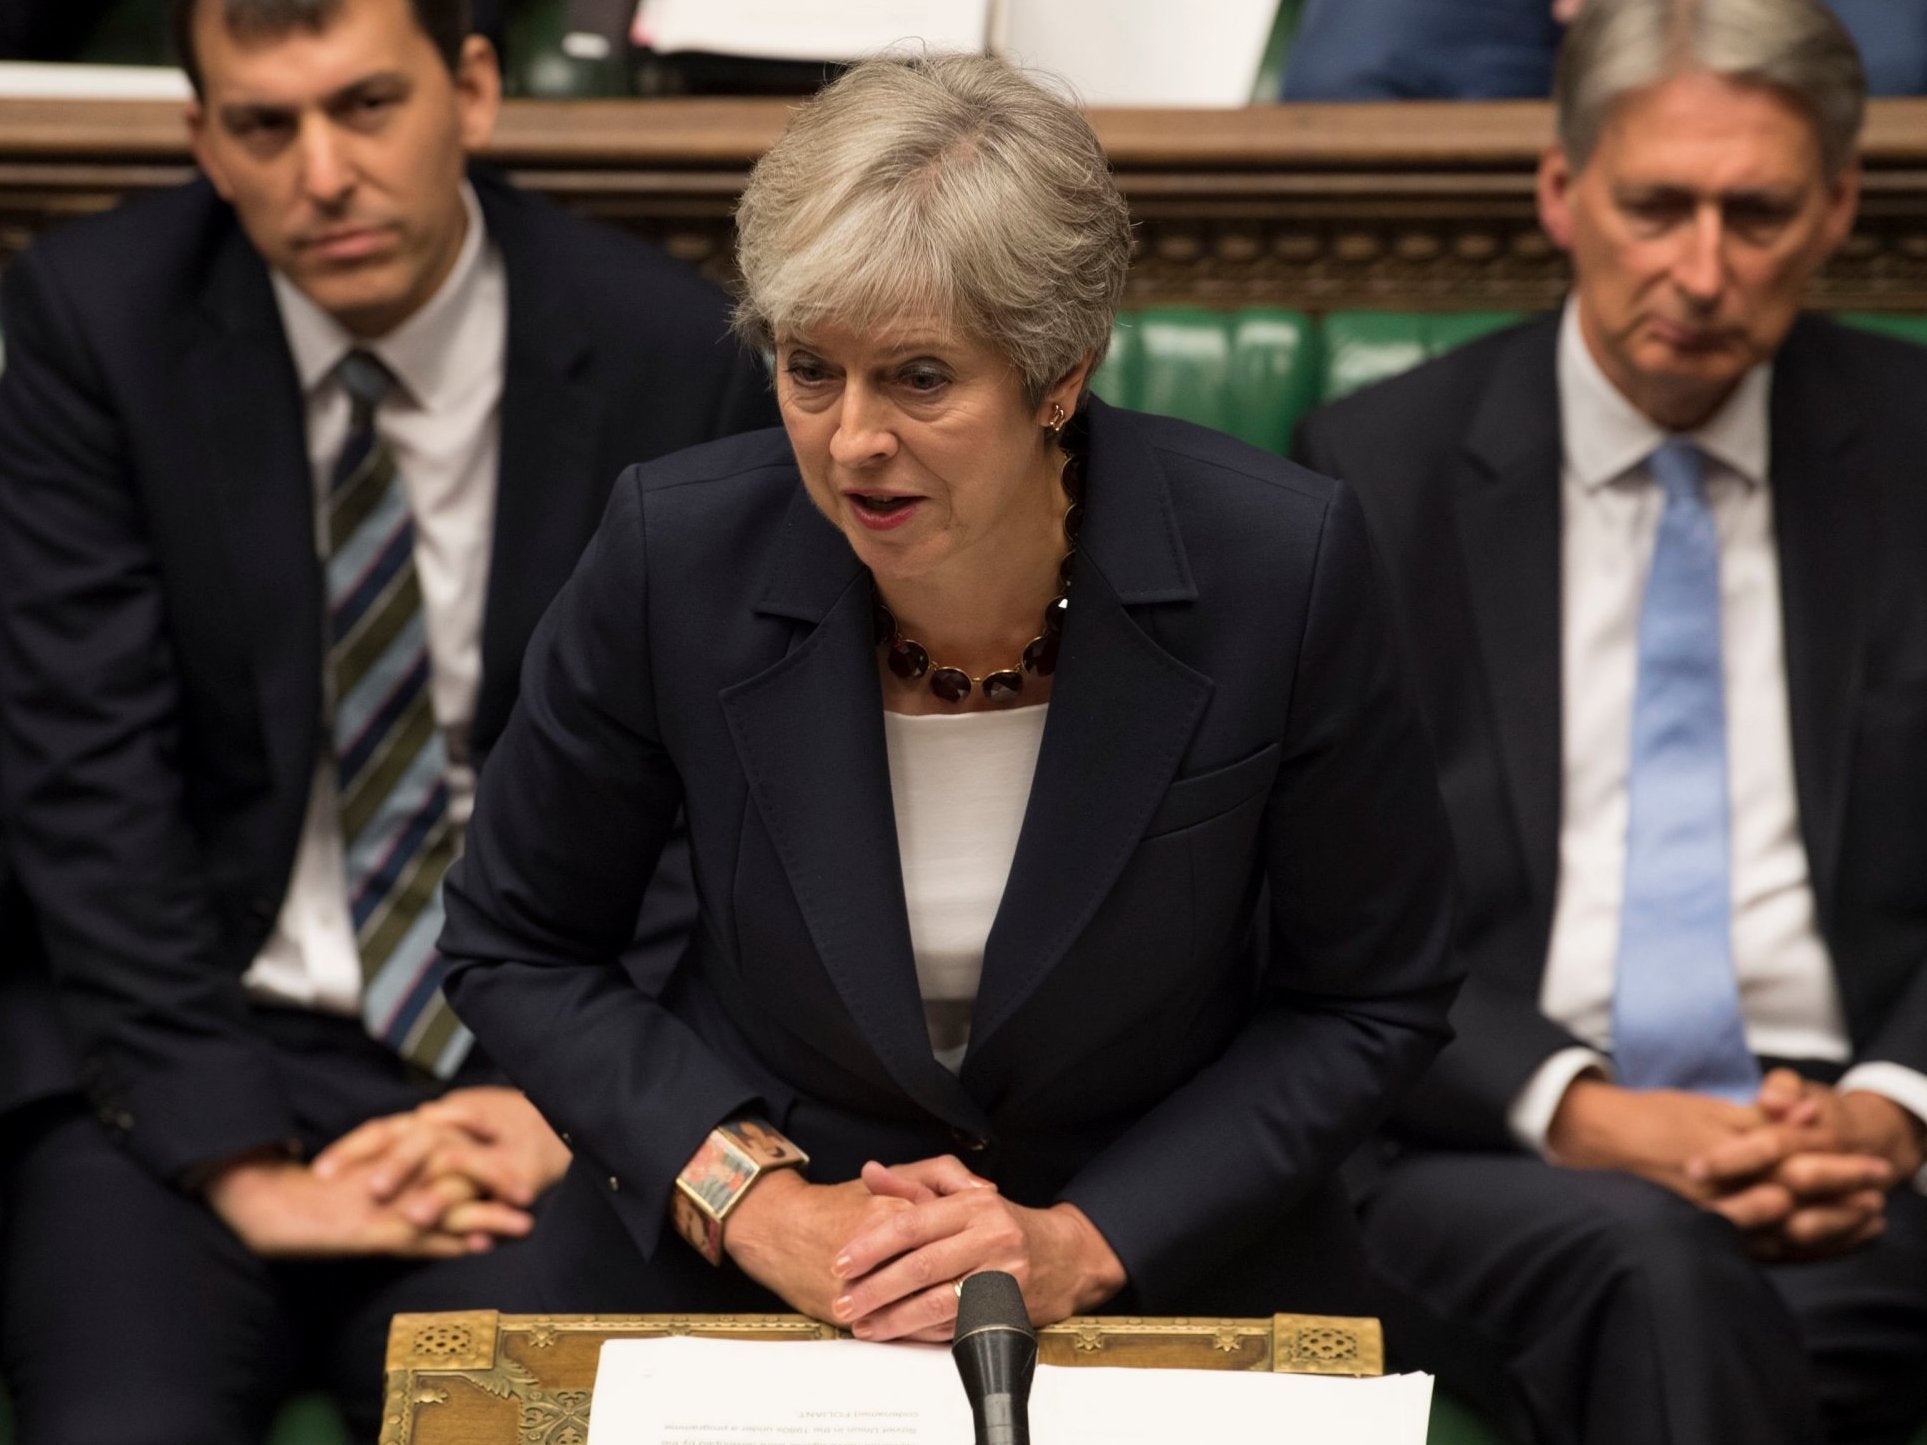 May updates parliament after arrest warrants are issued for two Russian nationals in connection with the poisoning